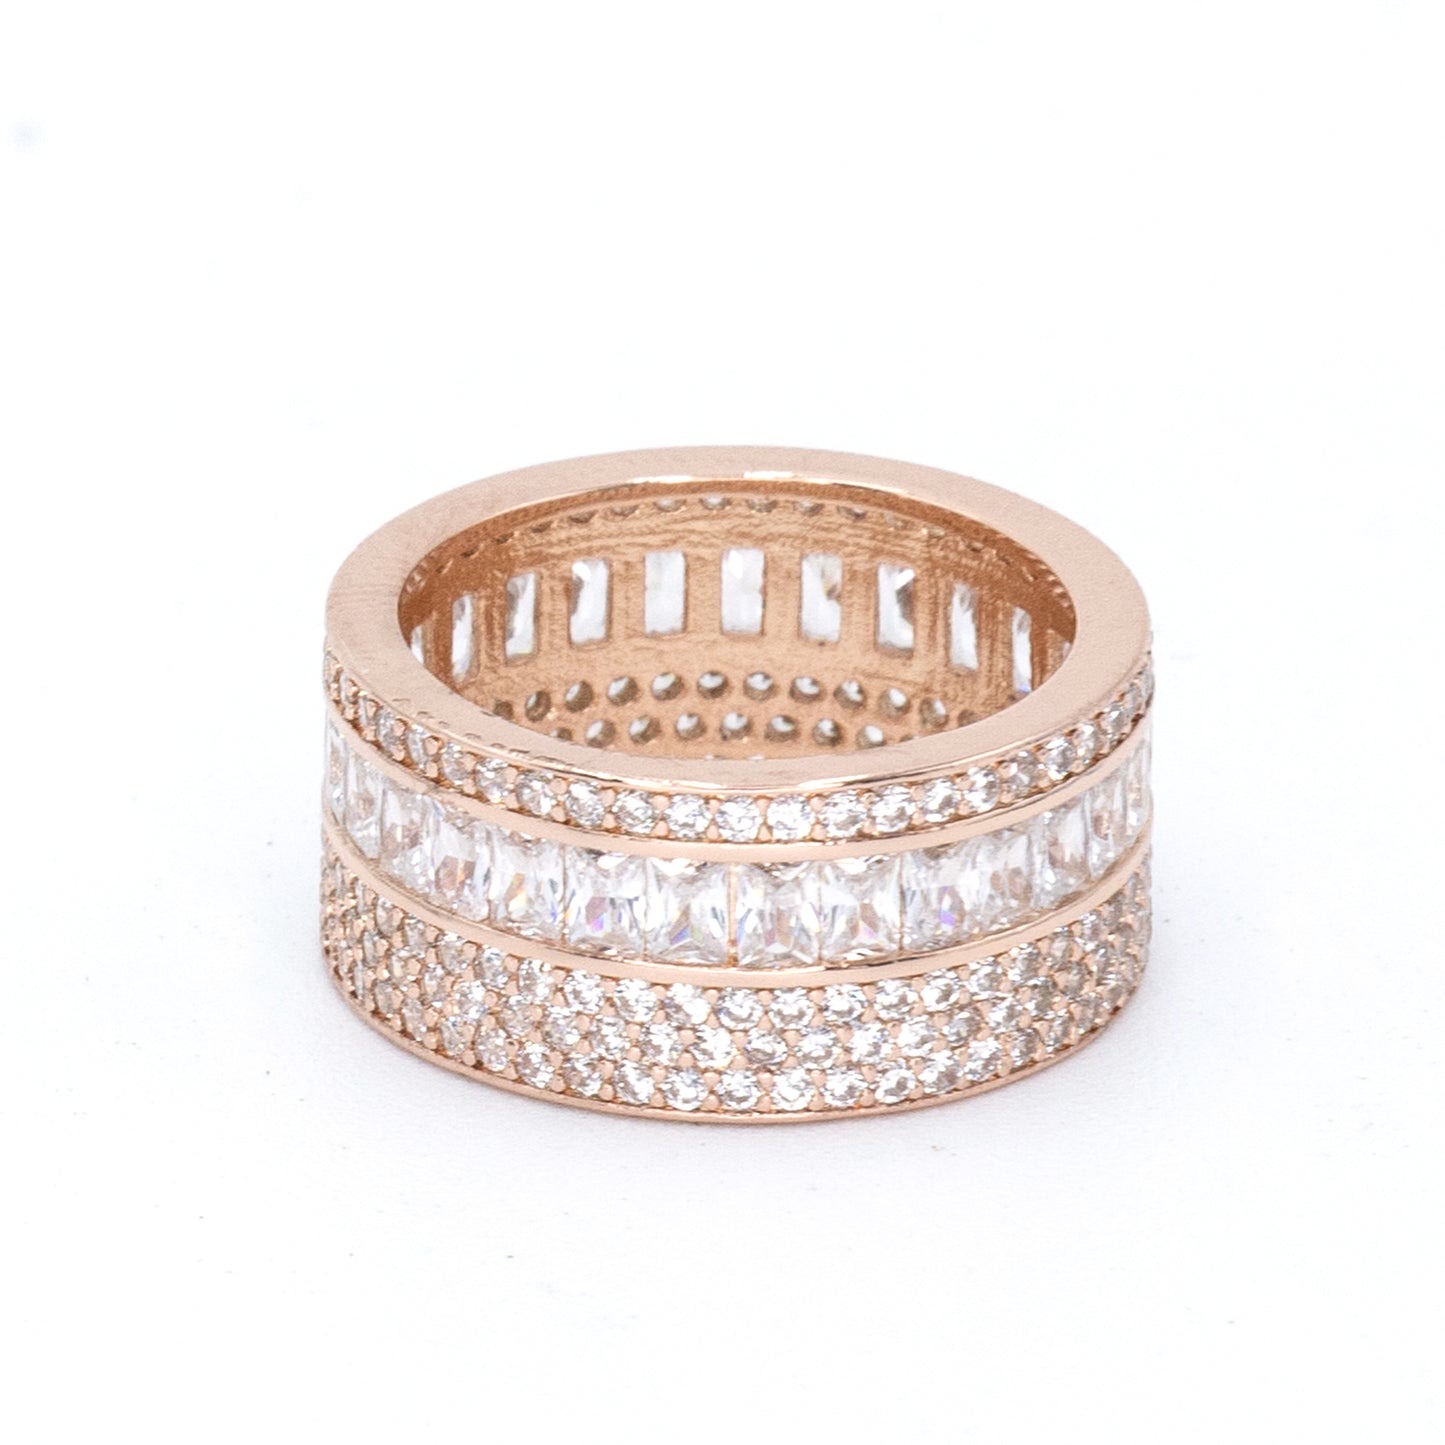 Thick pave band